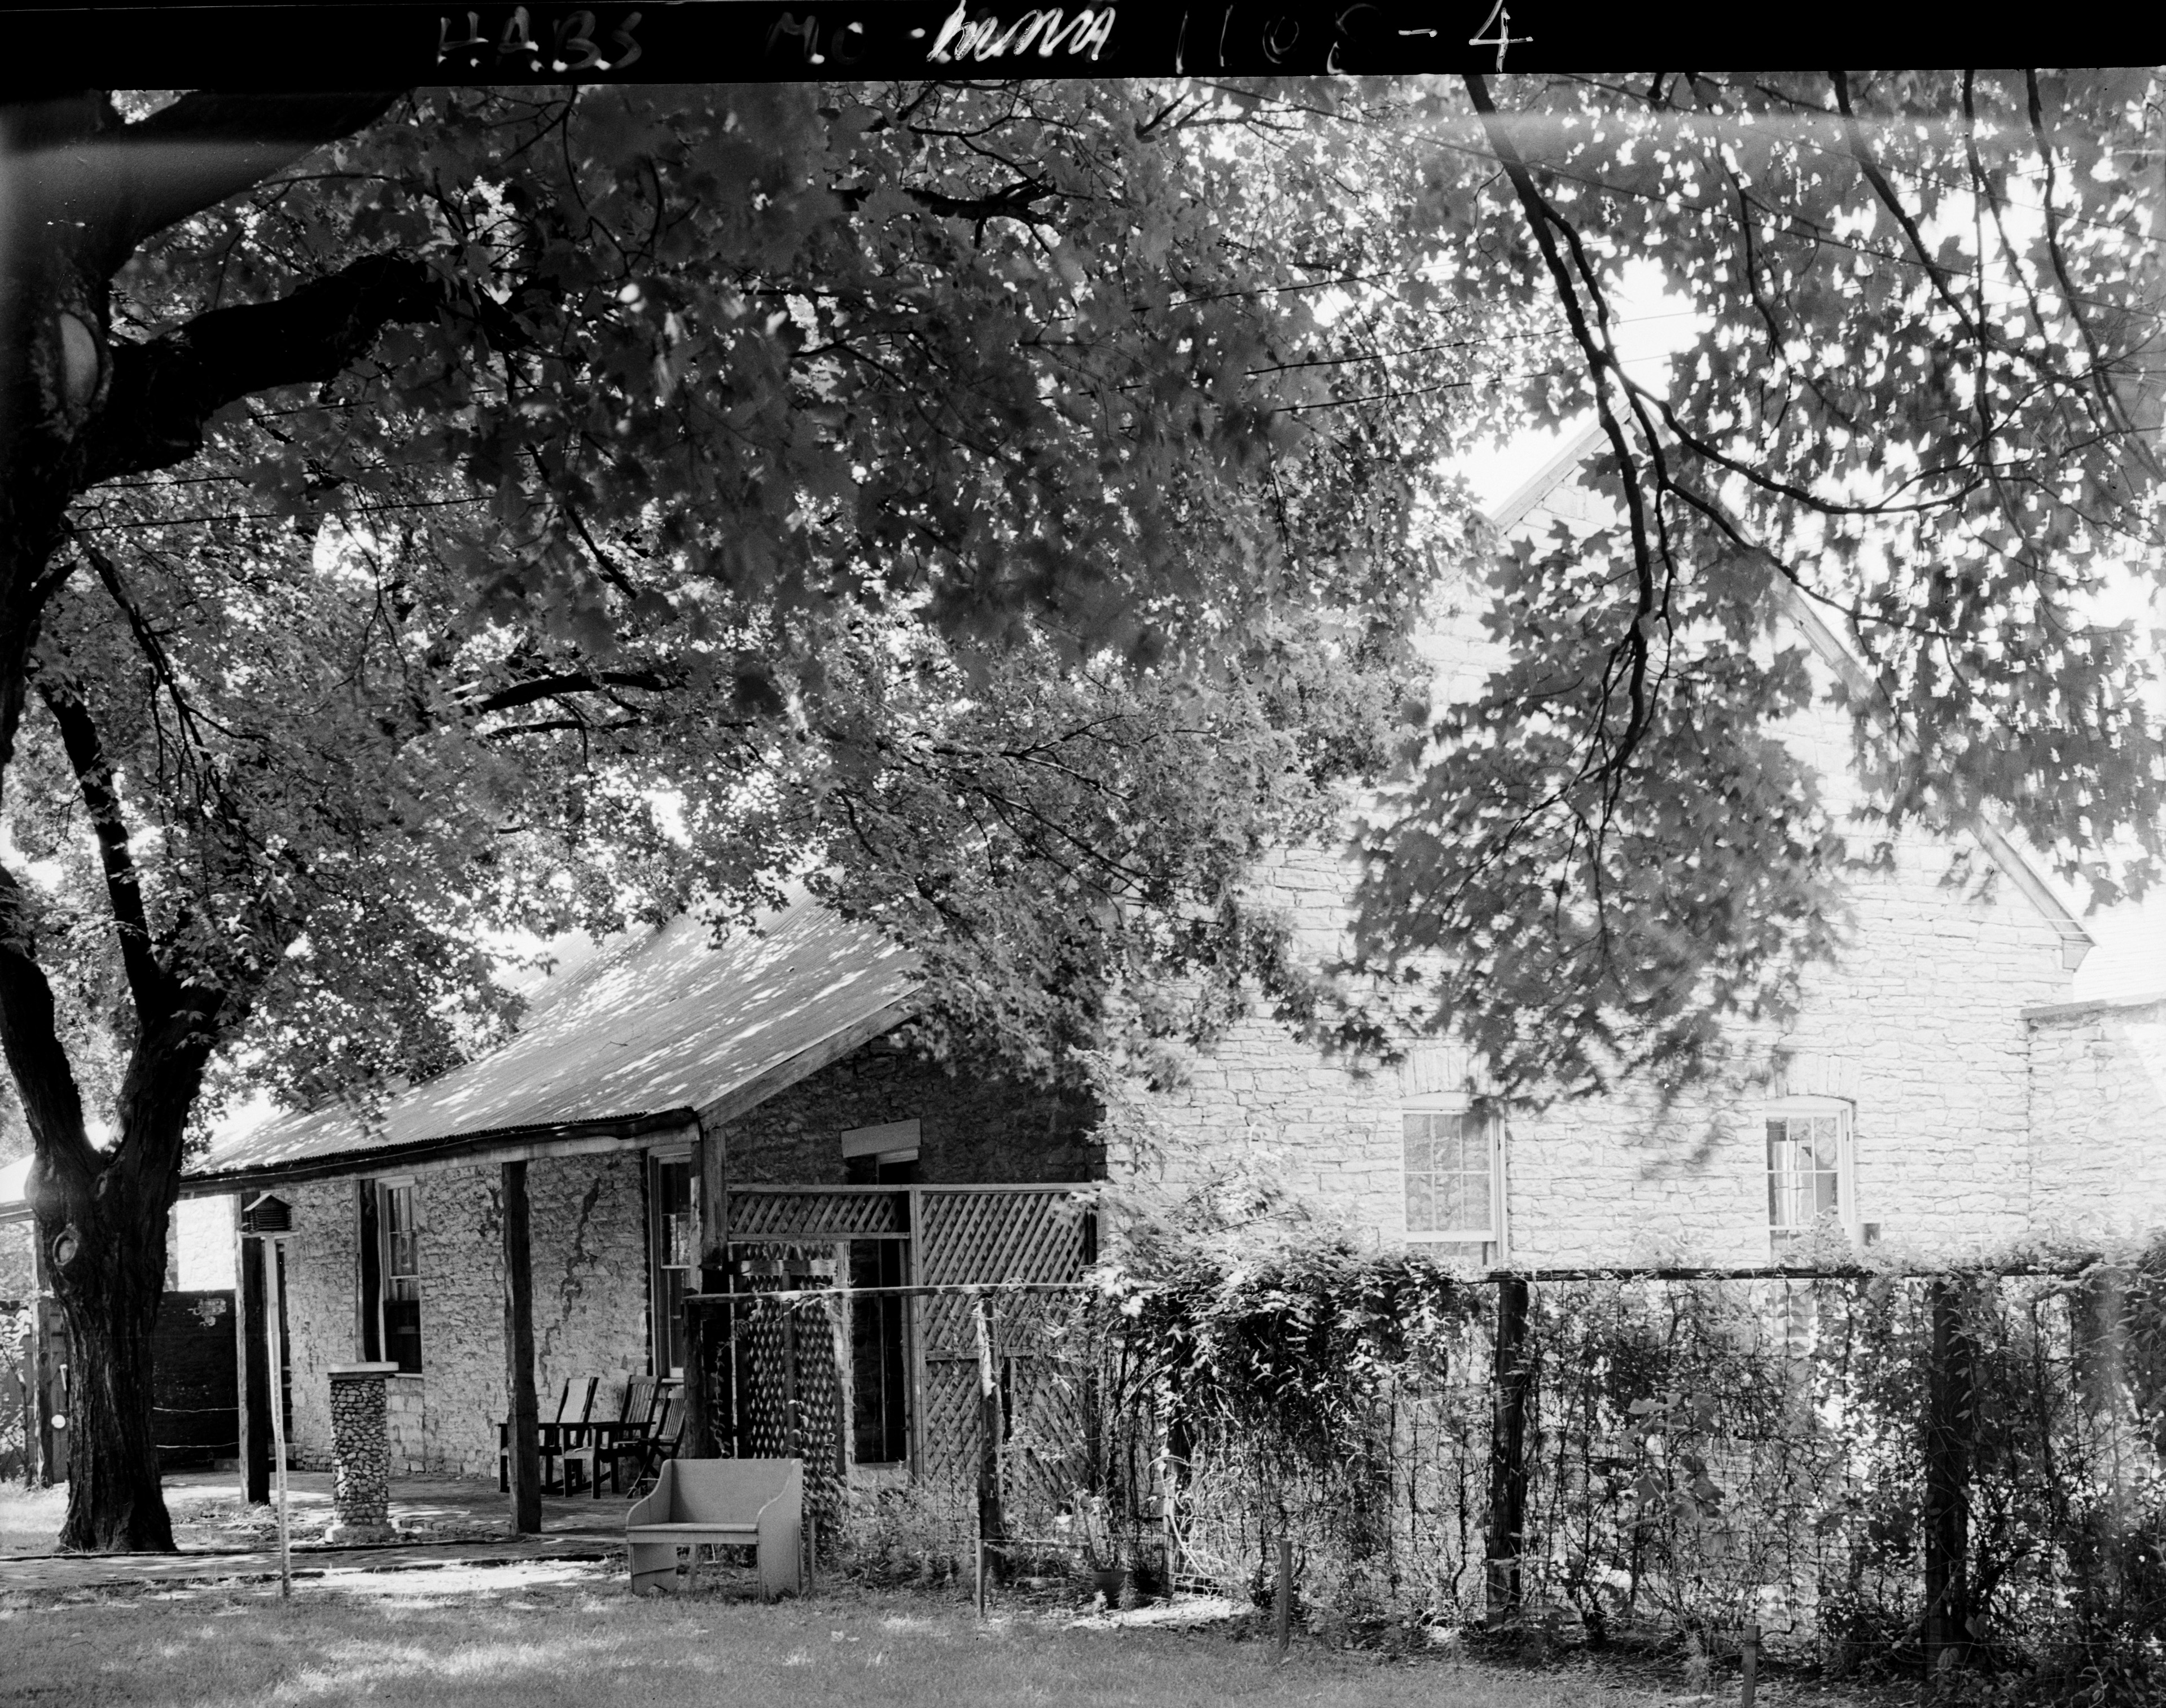 Photograph of the Yard of the Pratte Warehouse and Church in in Ste Genevieve MO